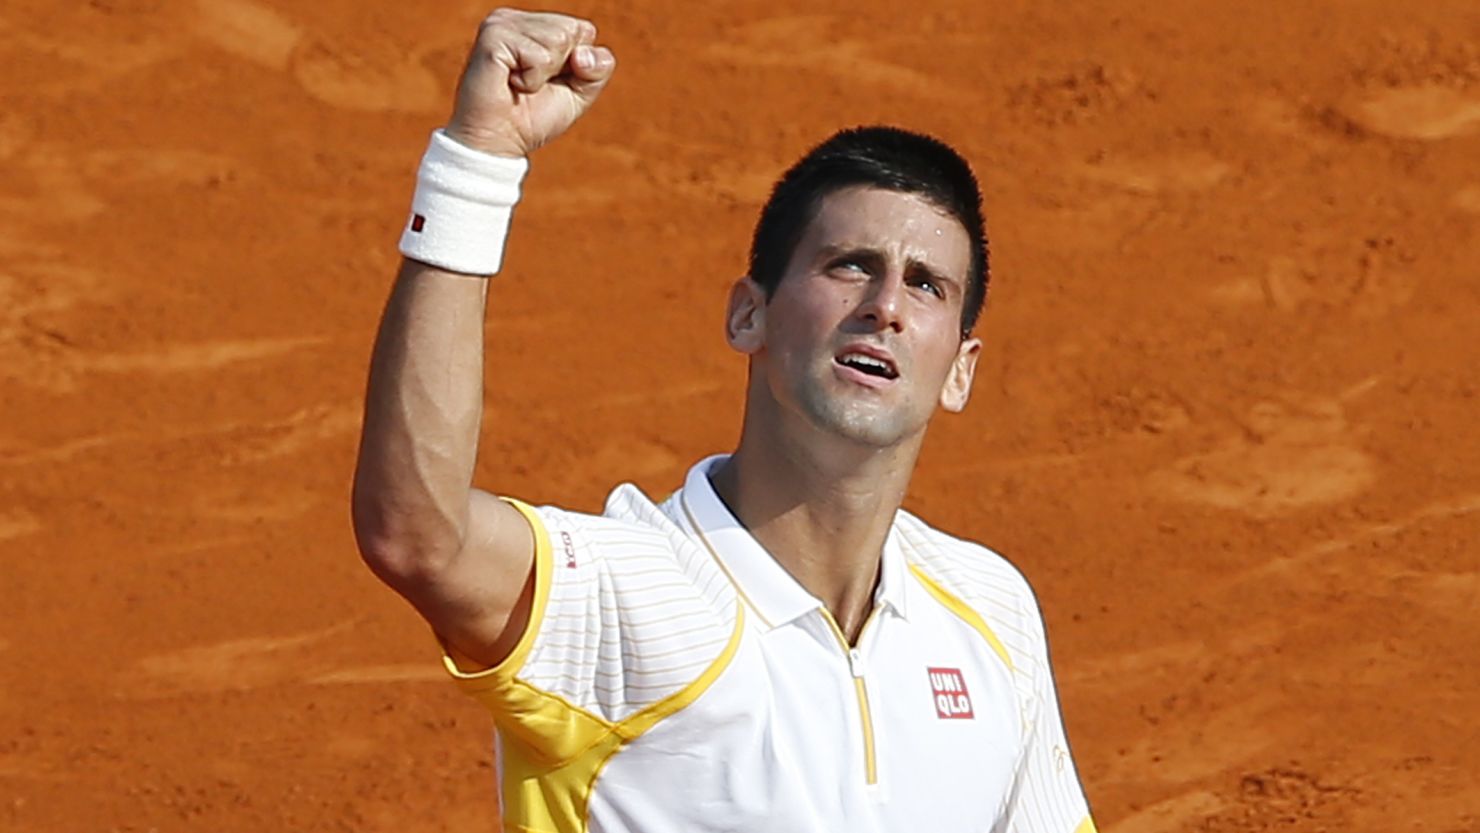 Novak Djokovic punches the air in relief after winning his second round match at the Monte Carlo Masters